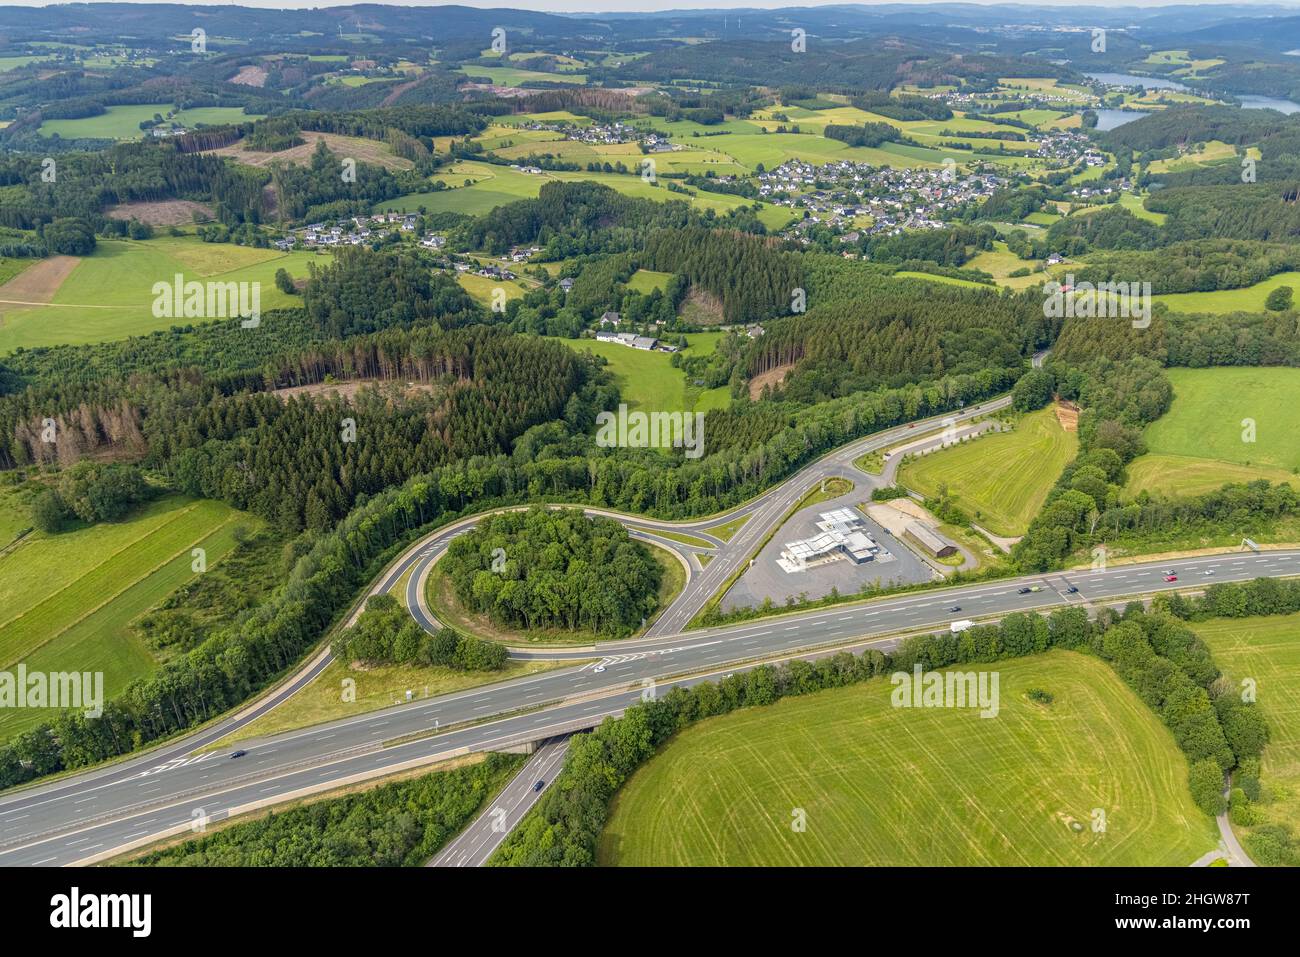 Aerial view, motorway junction Drolshagen, motorway A45 with petrol station and tree roundabout, Germinghausen, Drolshagen, Sauerland, North Rhine-Wes Stock Photo